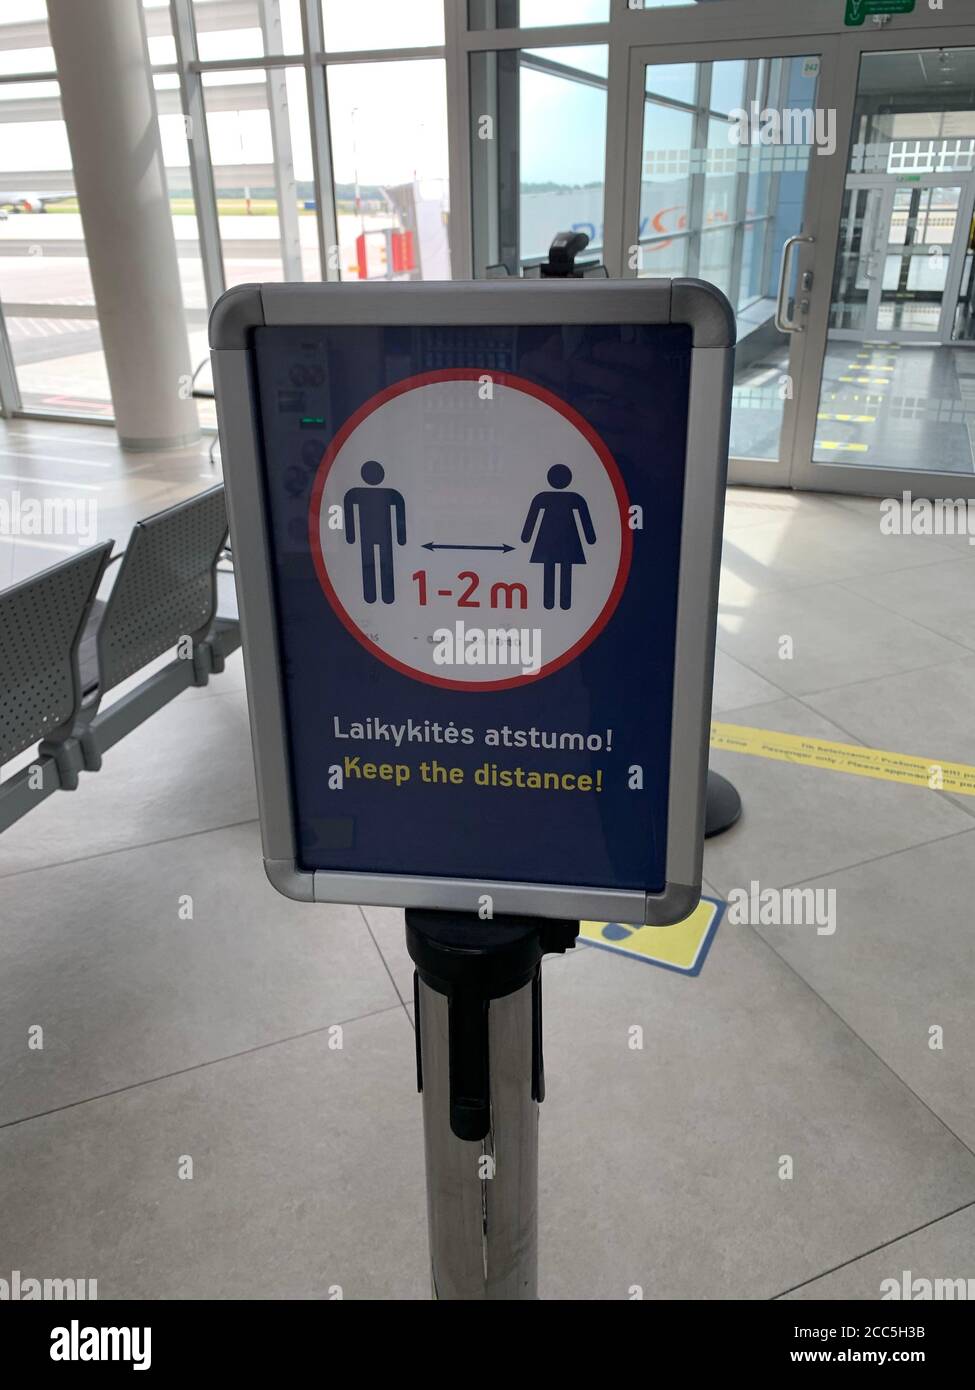 Social distancing sign at Vilnius airport. Passengers have to keep 1-2 meters distance to protect from corona virus spreading. Vilnius / Lithuania. Stock Photo